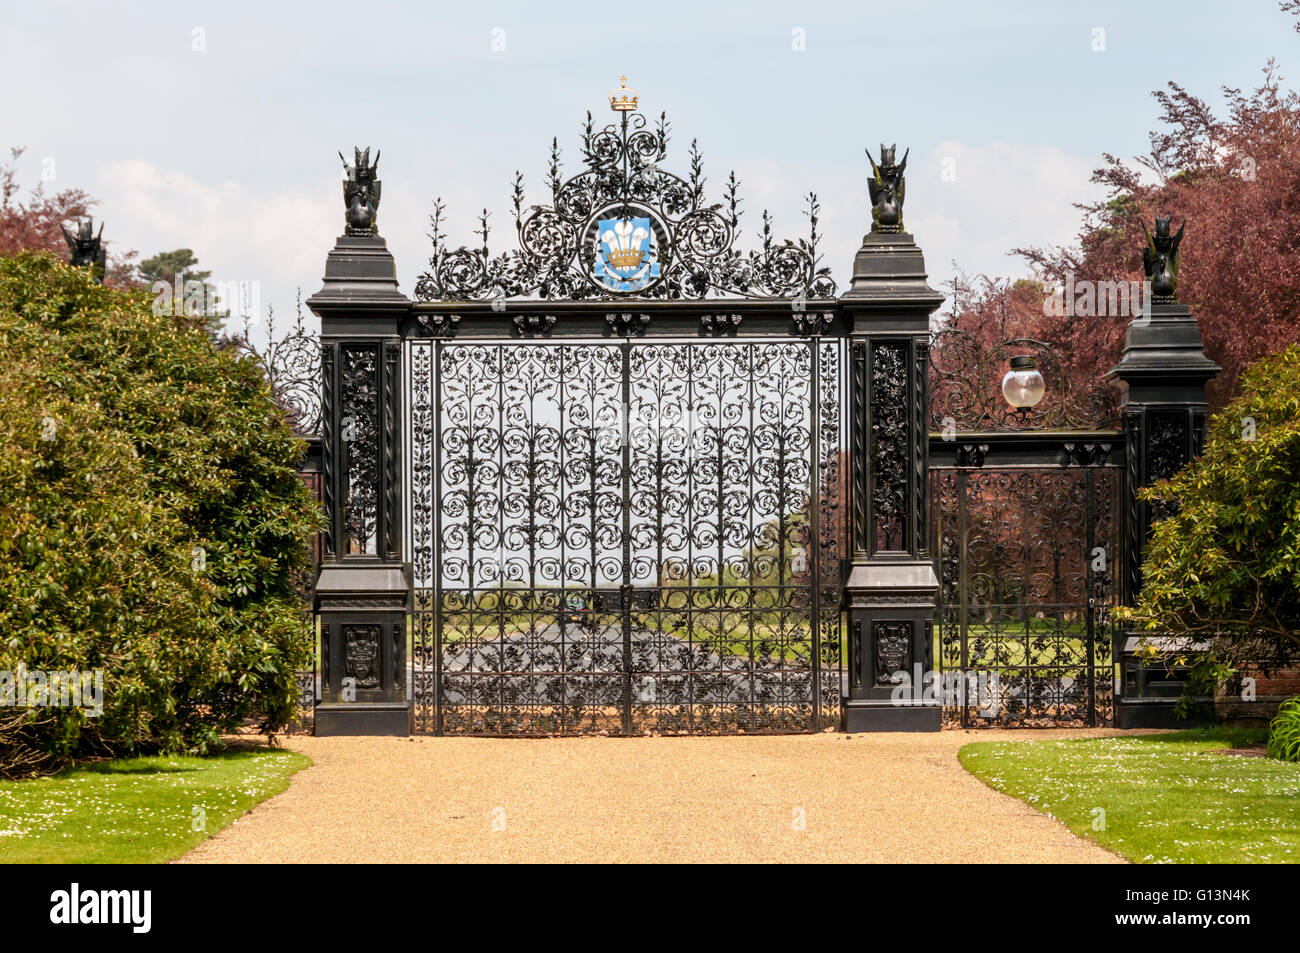 The Norwich Gates at the entrance to Sandringham House.  Seen from inside the grounds. Stock Photo